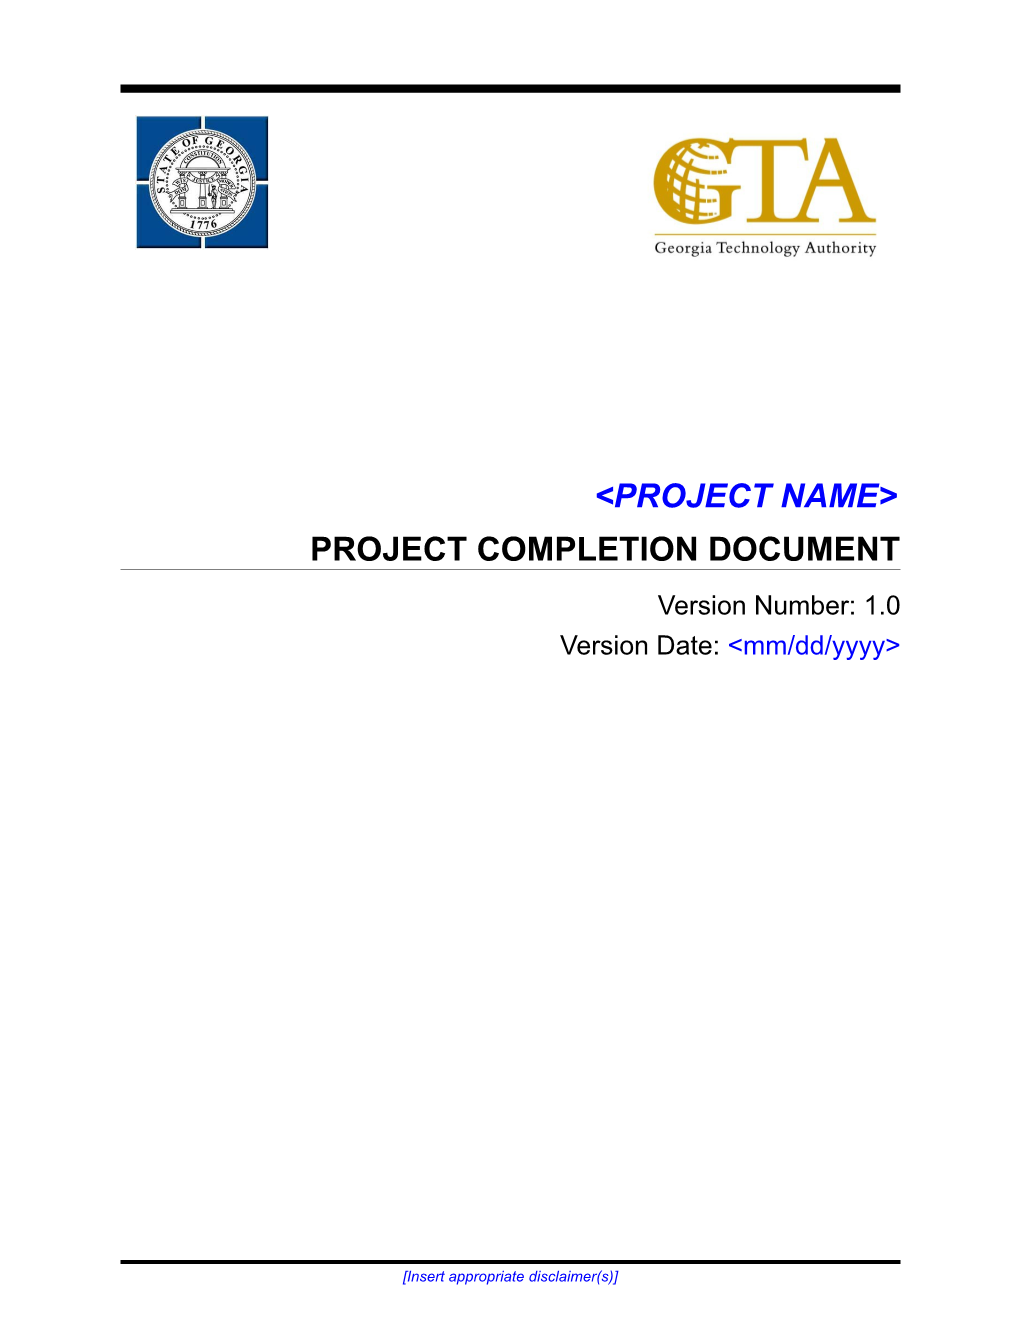 Project Completion Document